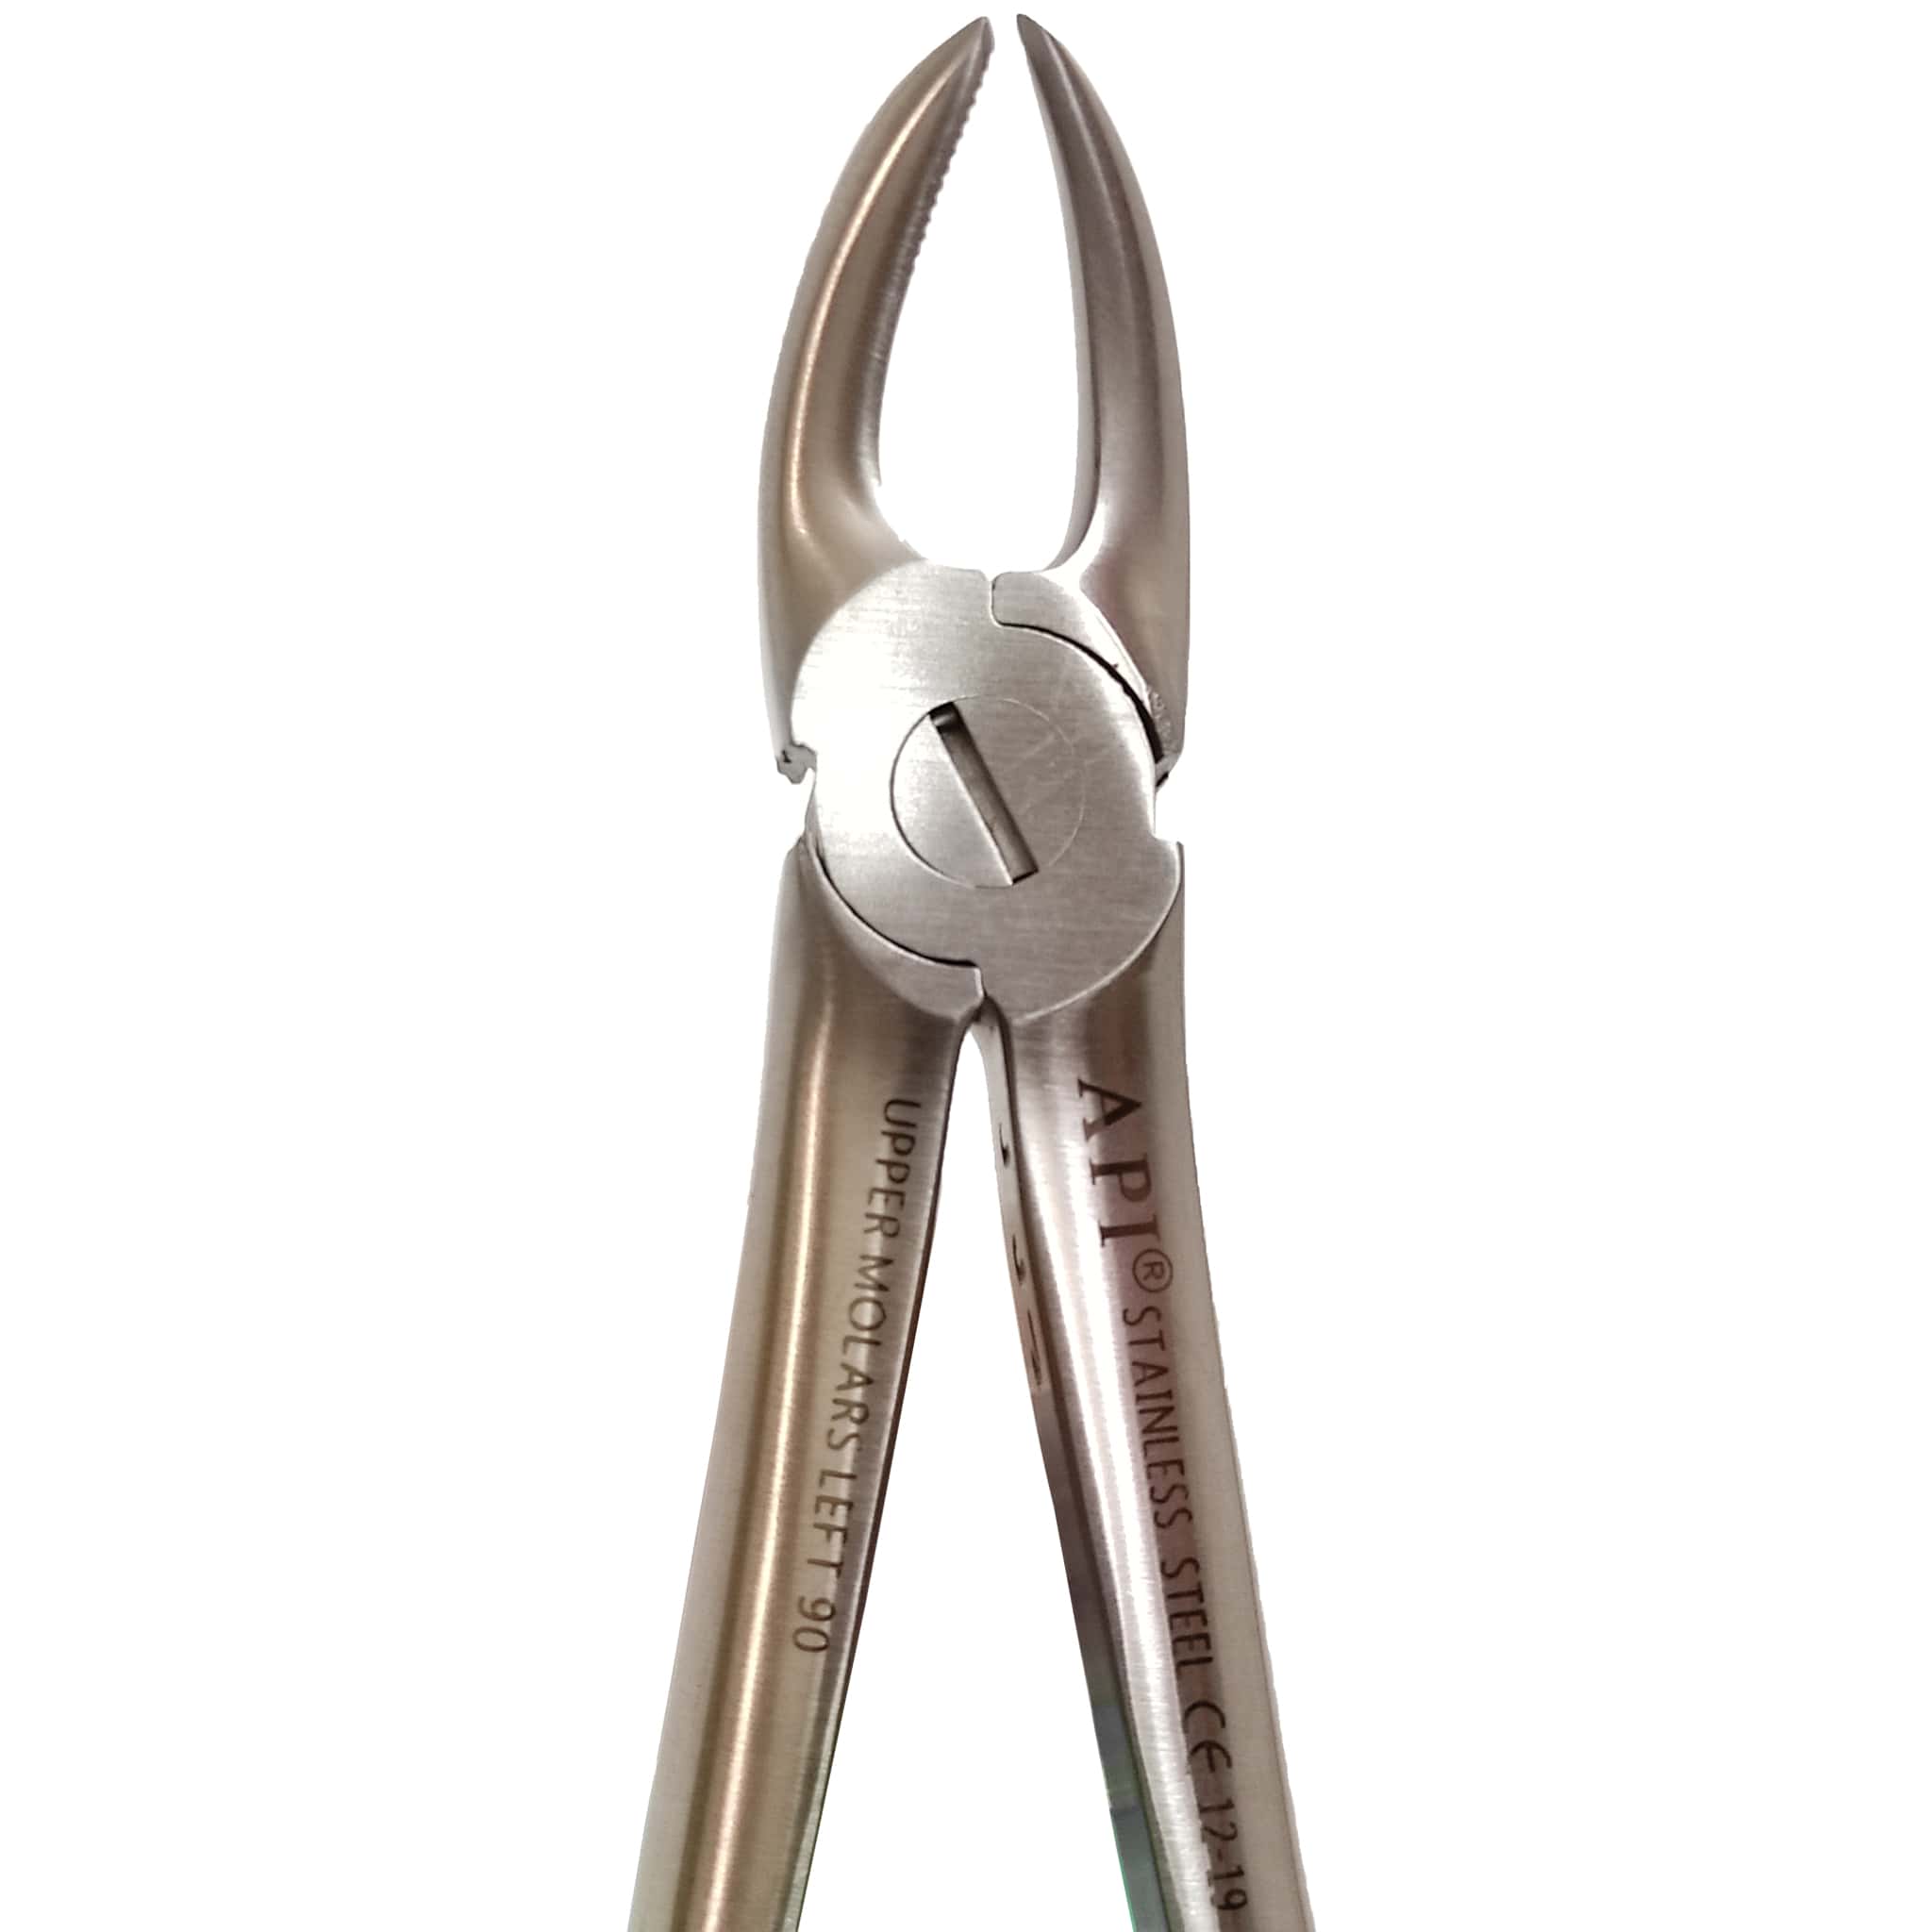 API Extraction Forceps Cow Horn